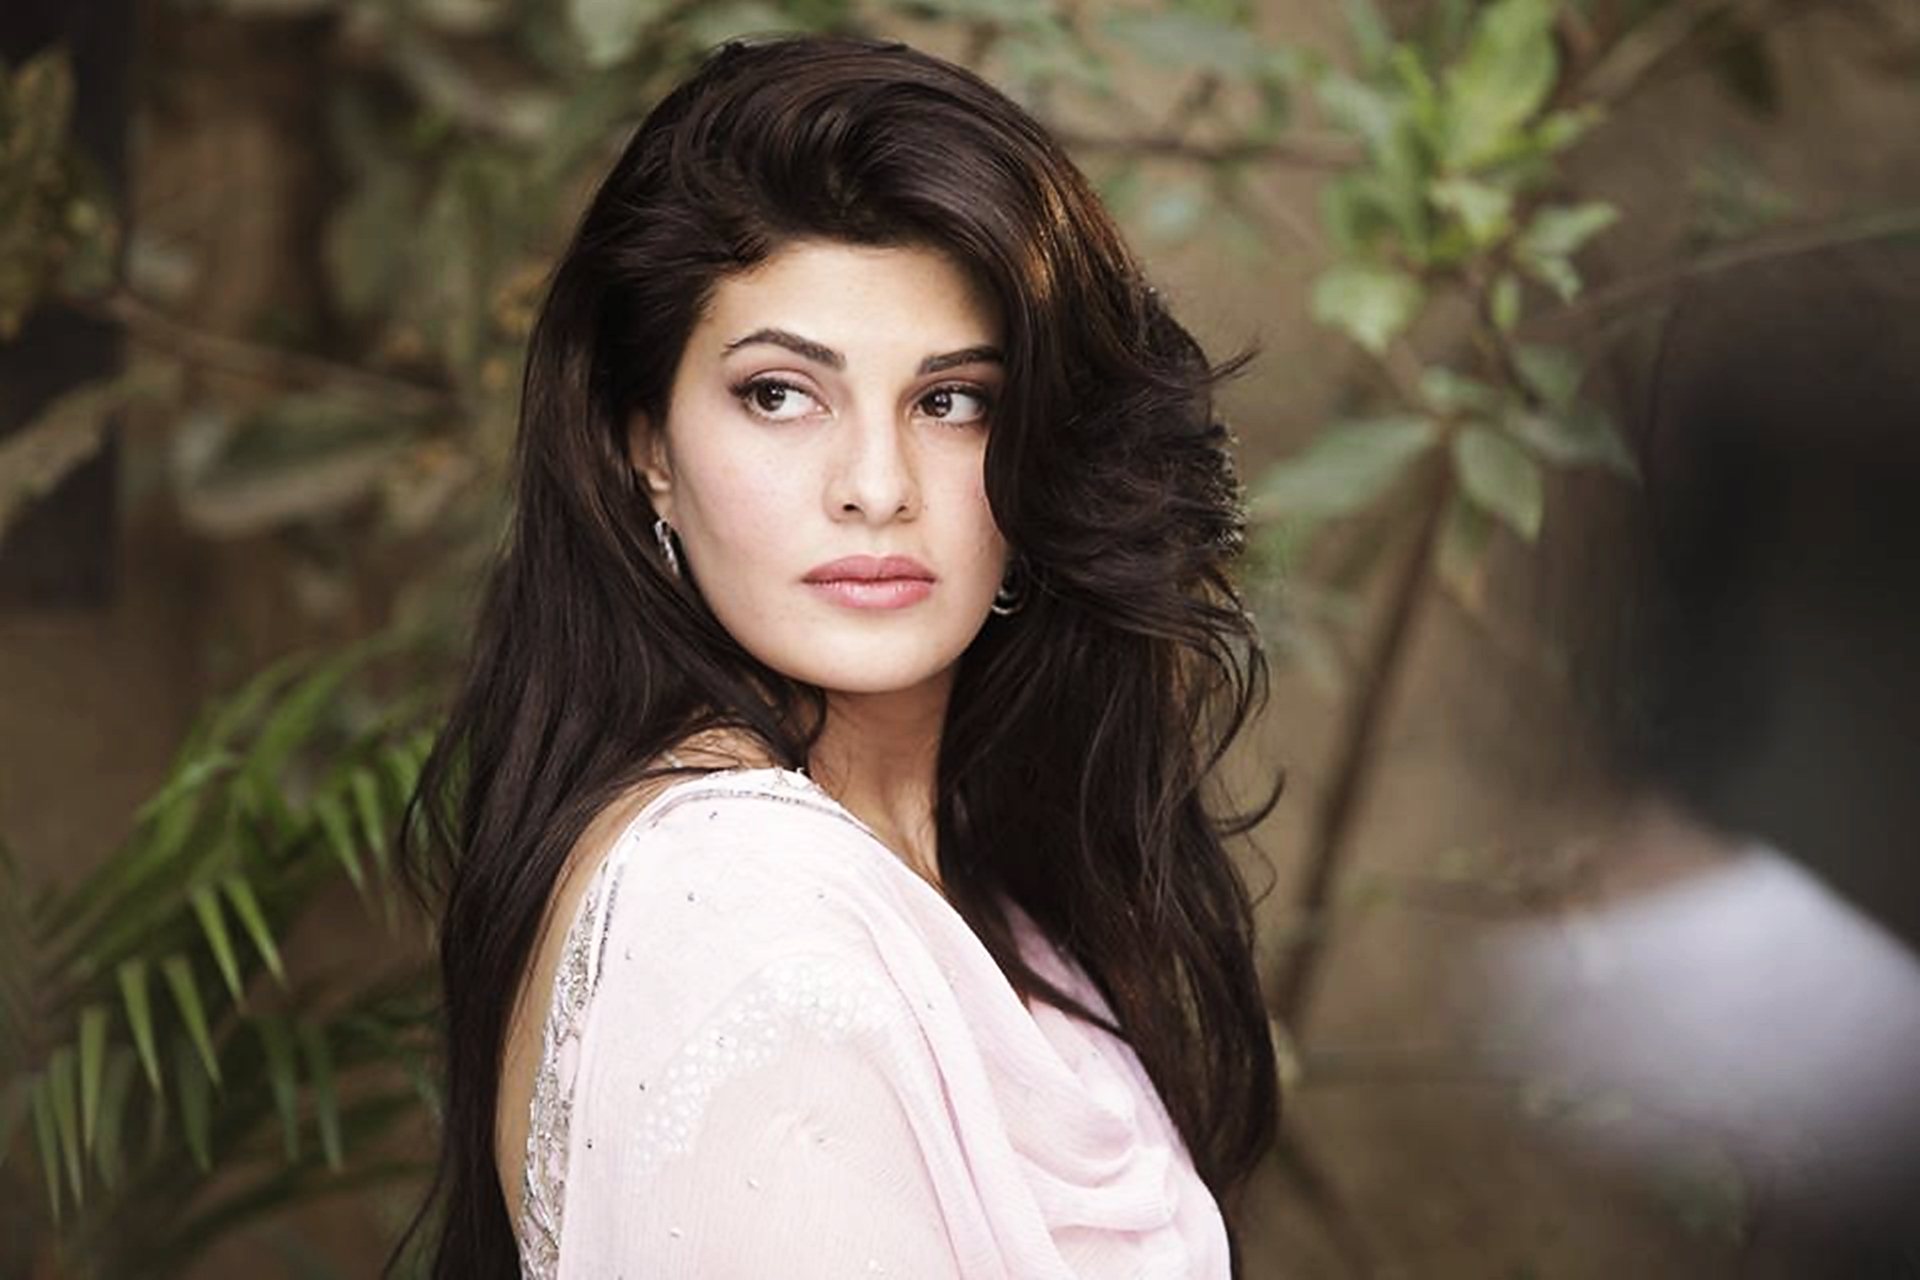 Here's what Jacqueline Fernandez has to say about her rumoured relationship